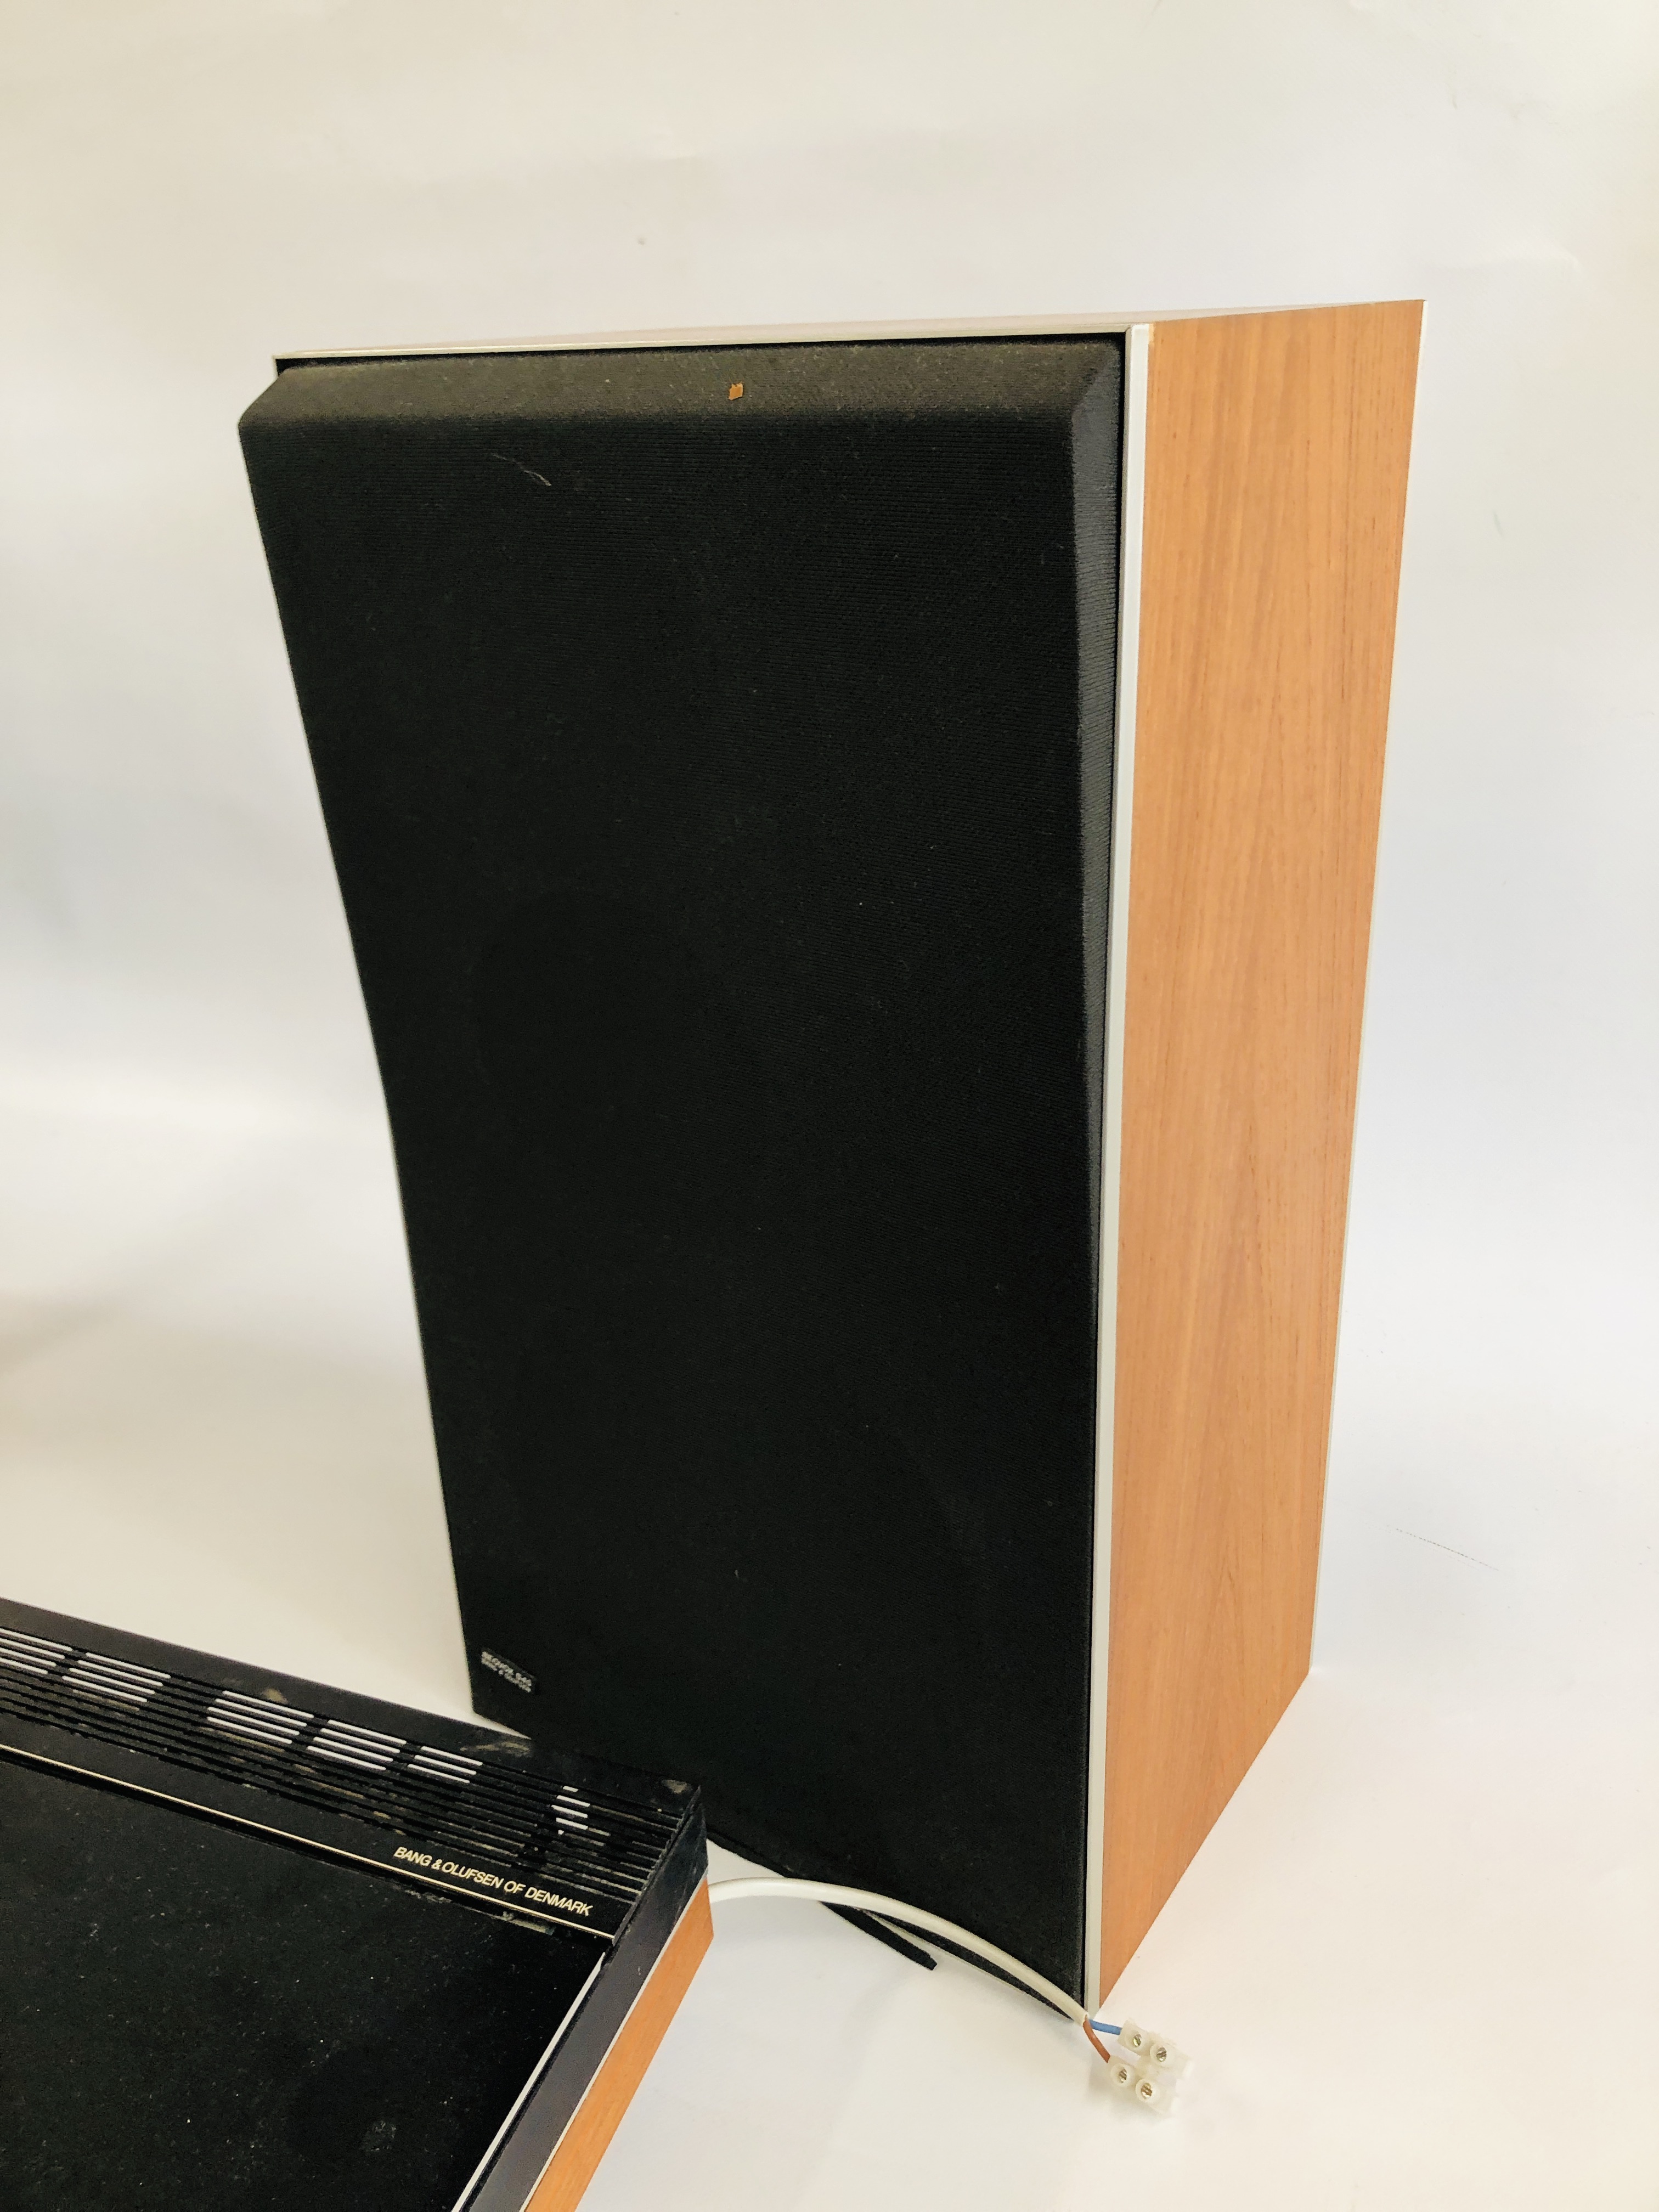 A BANG & OLUFSEN BEOCENTRE 5000 COMPLETE WITH A PAIR OF BEOVAX 545 SPEAKERS - SOLD AS SEEN. - Image 8 of 11